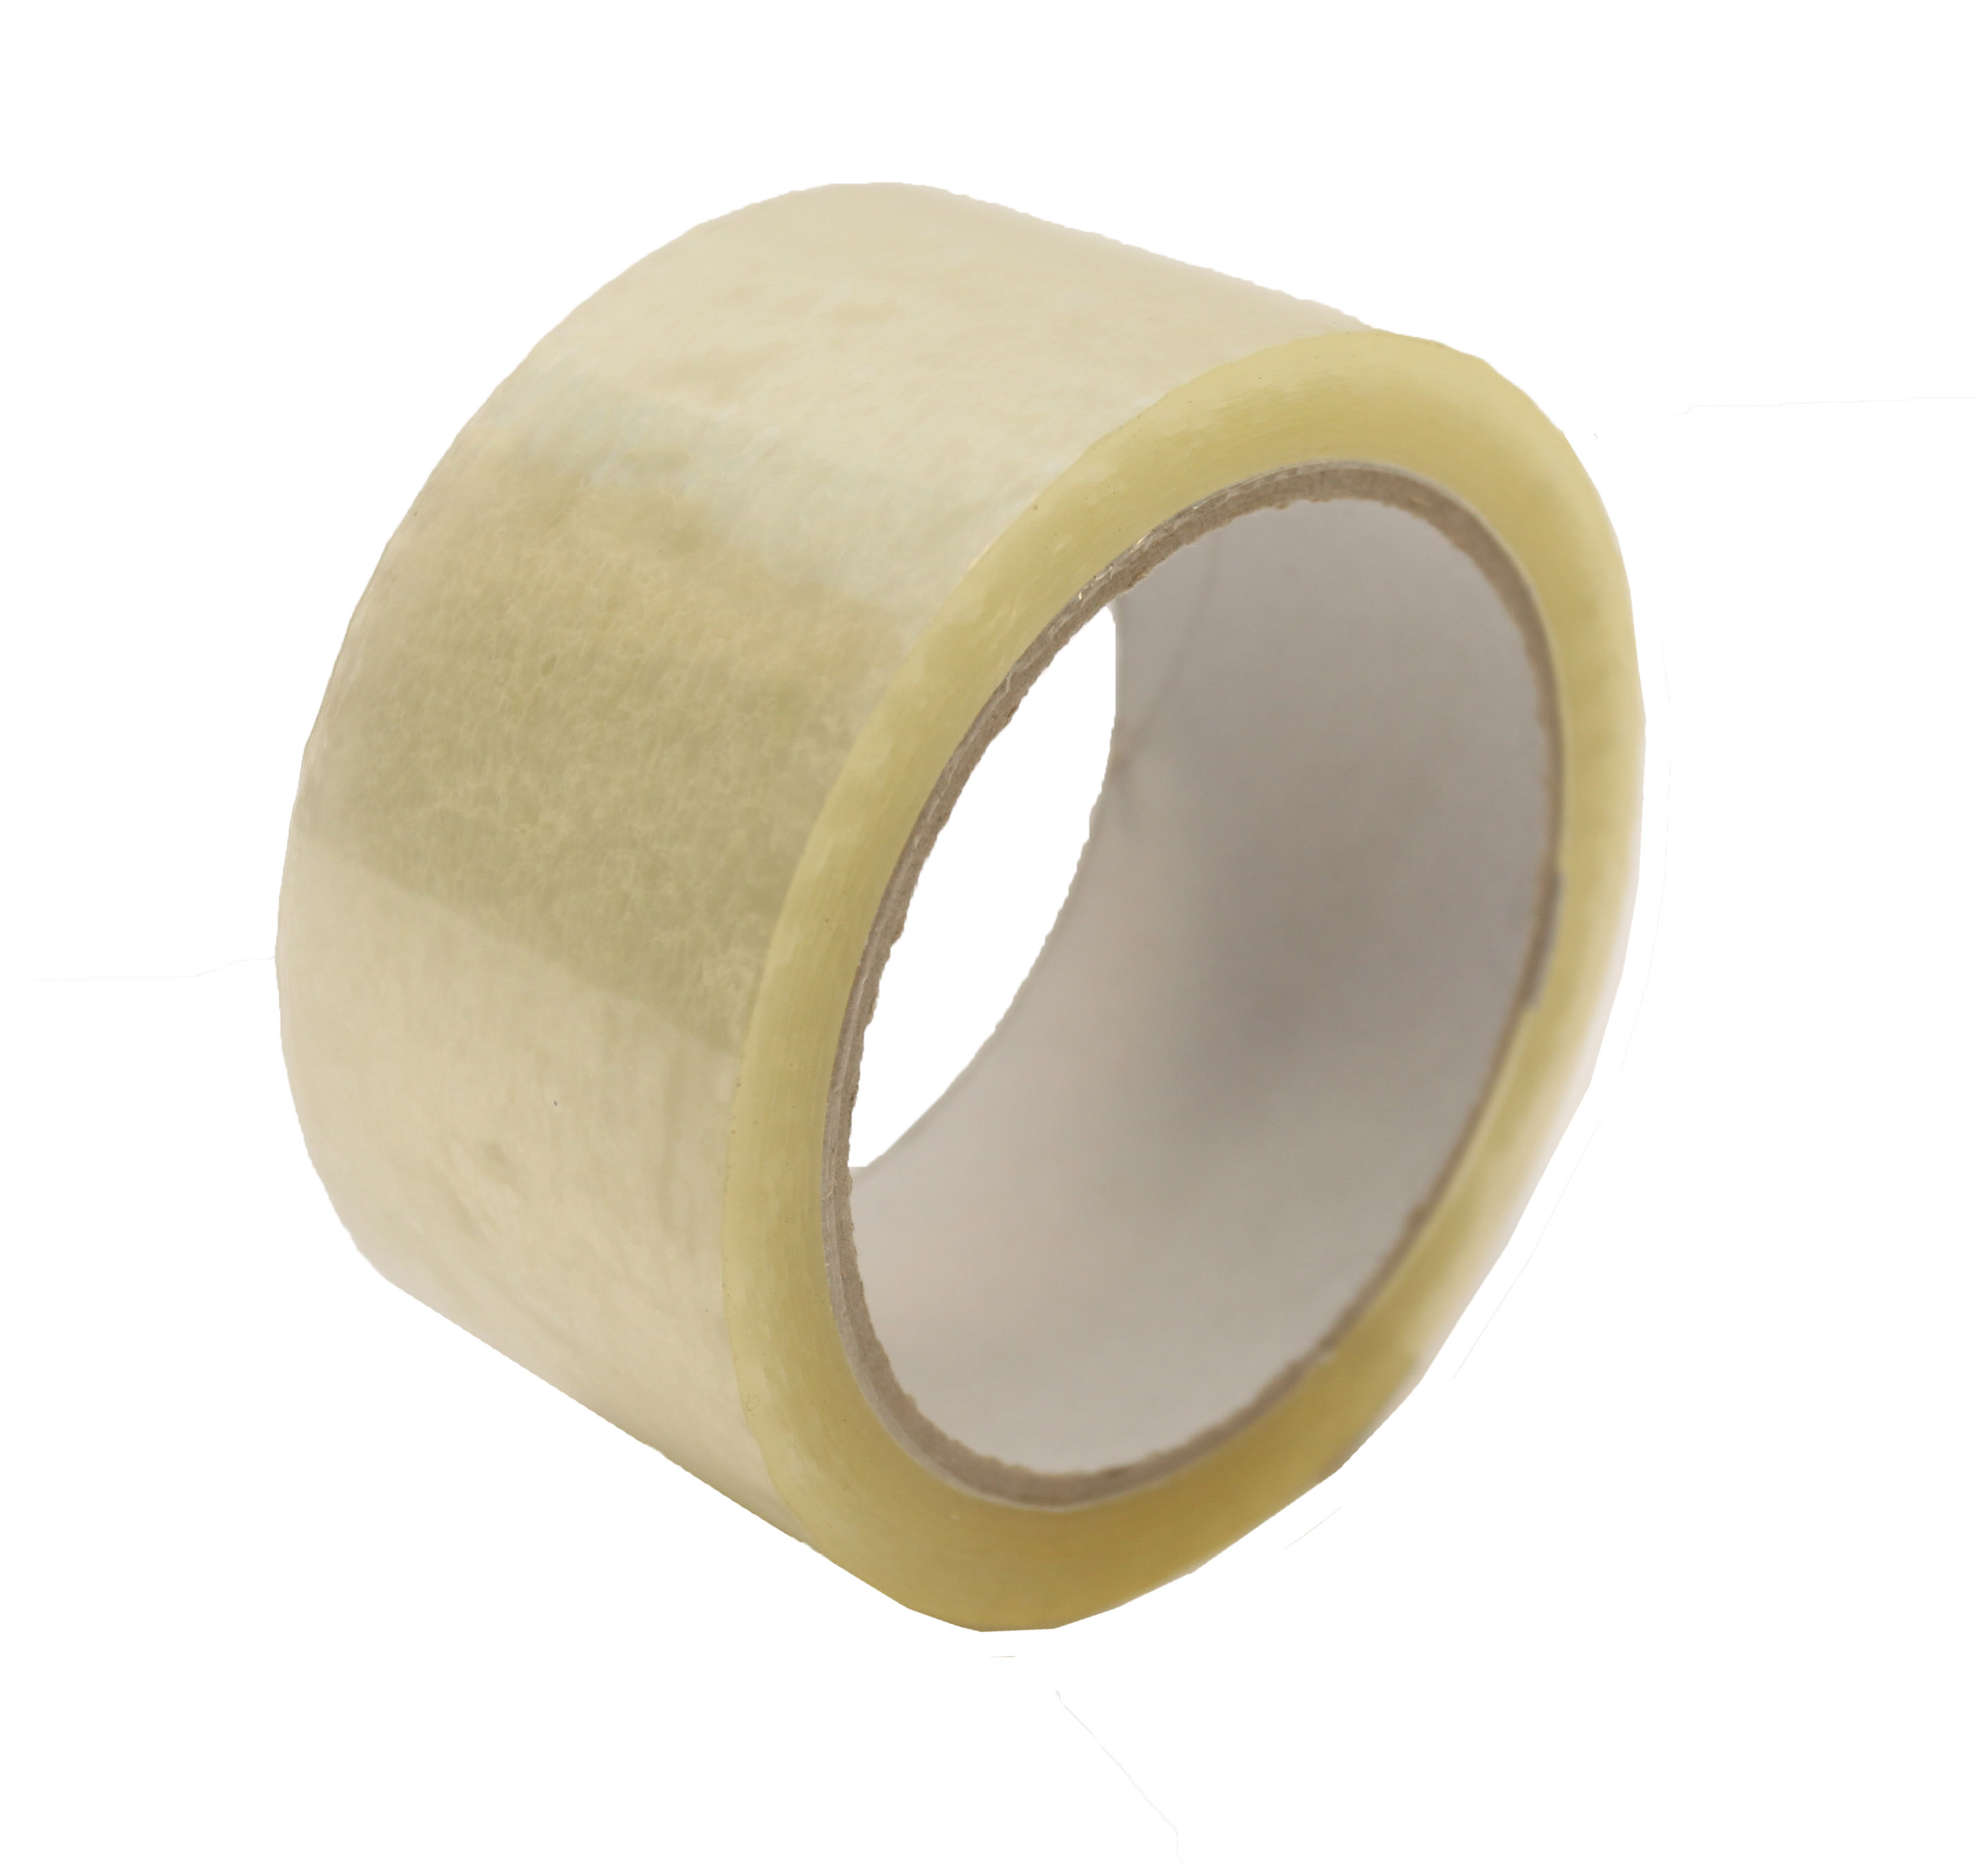 PREMIUM LOW NOISE FRAGILE PARCEL PACKING TAPES FOR SEALING BOXES 48mm x 66M 